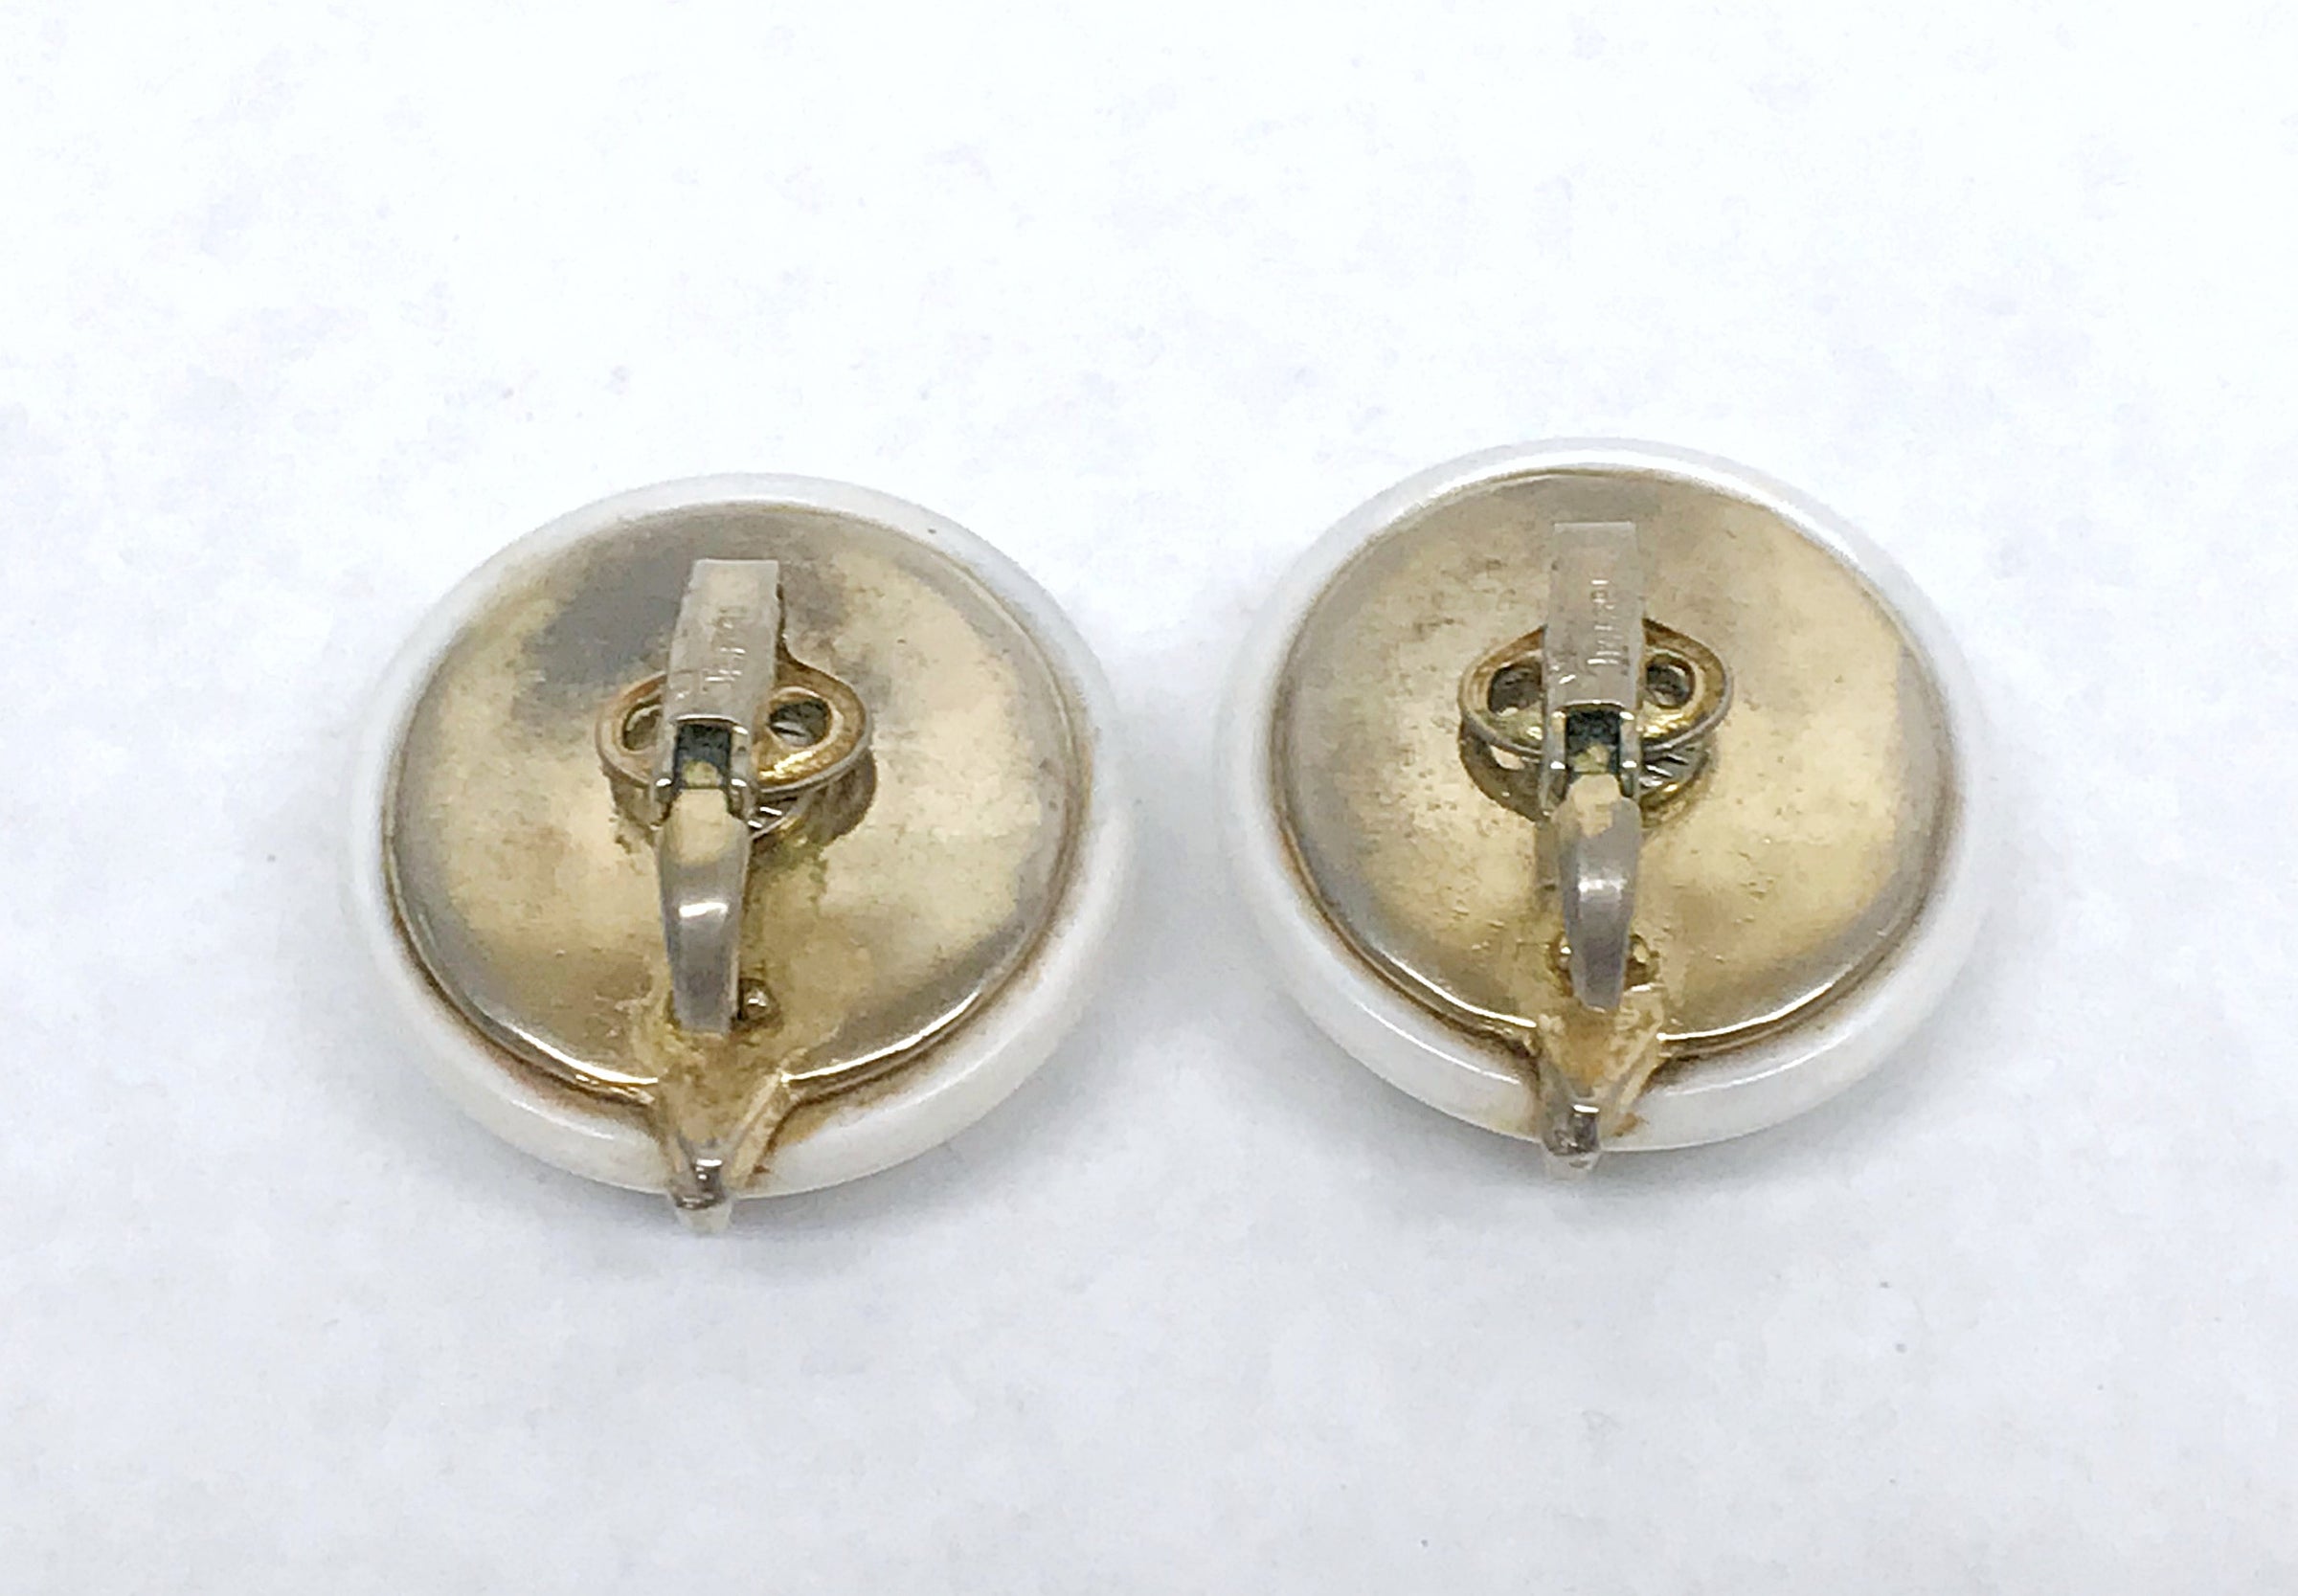 1930's-1955 Crown Trifari Signed White Lucite Button Clip-On Earrings - Hers and His Treasures